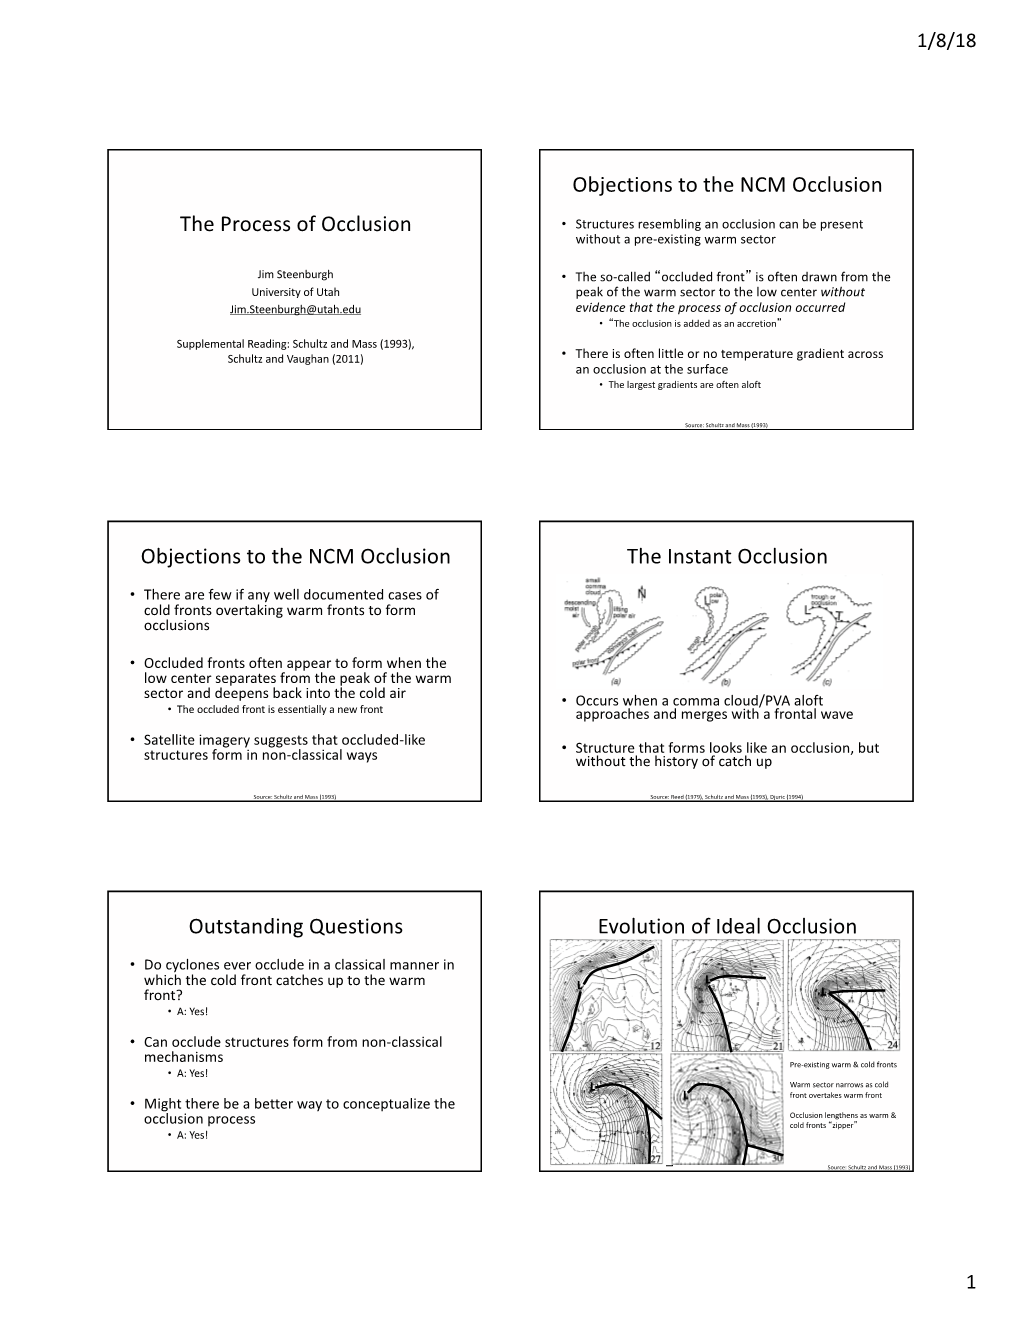 The Process of Occlusion Objections to the NCM Occlusion Objections To